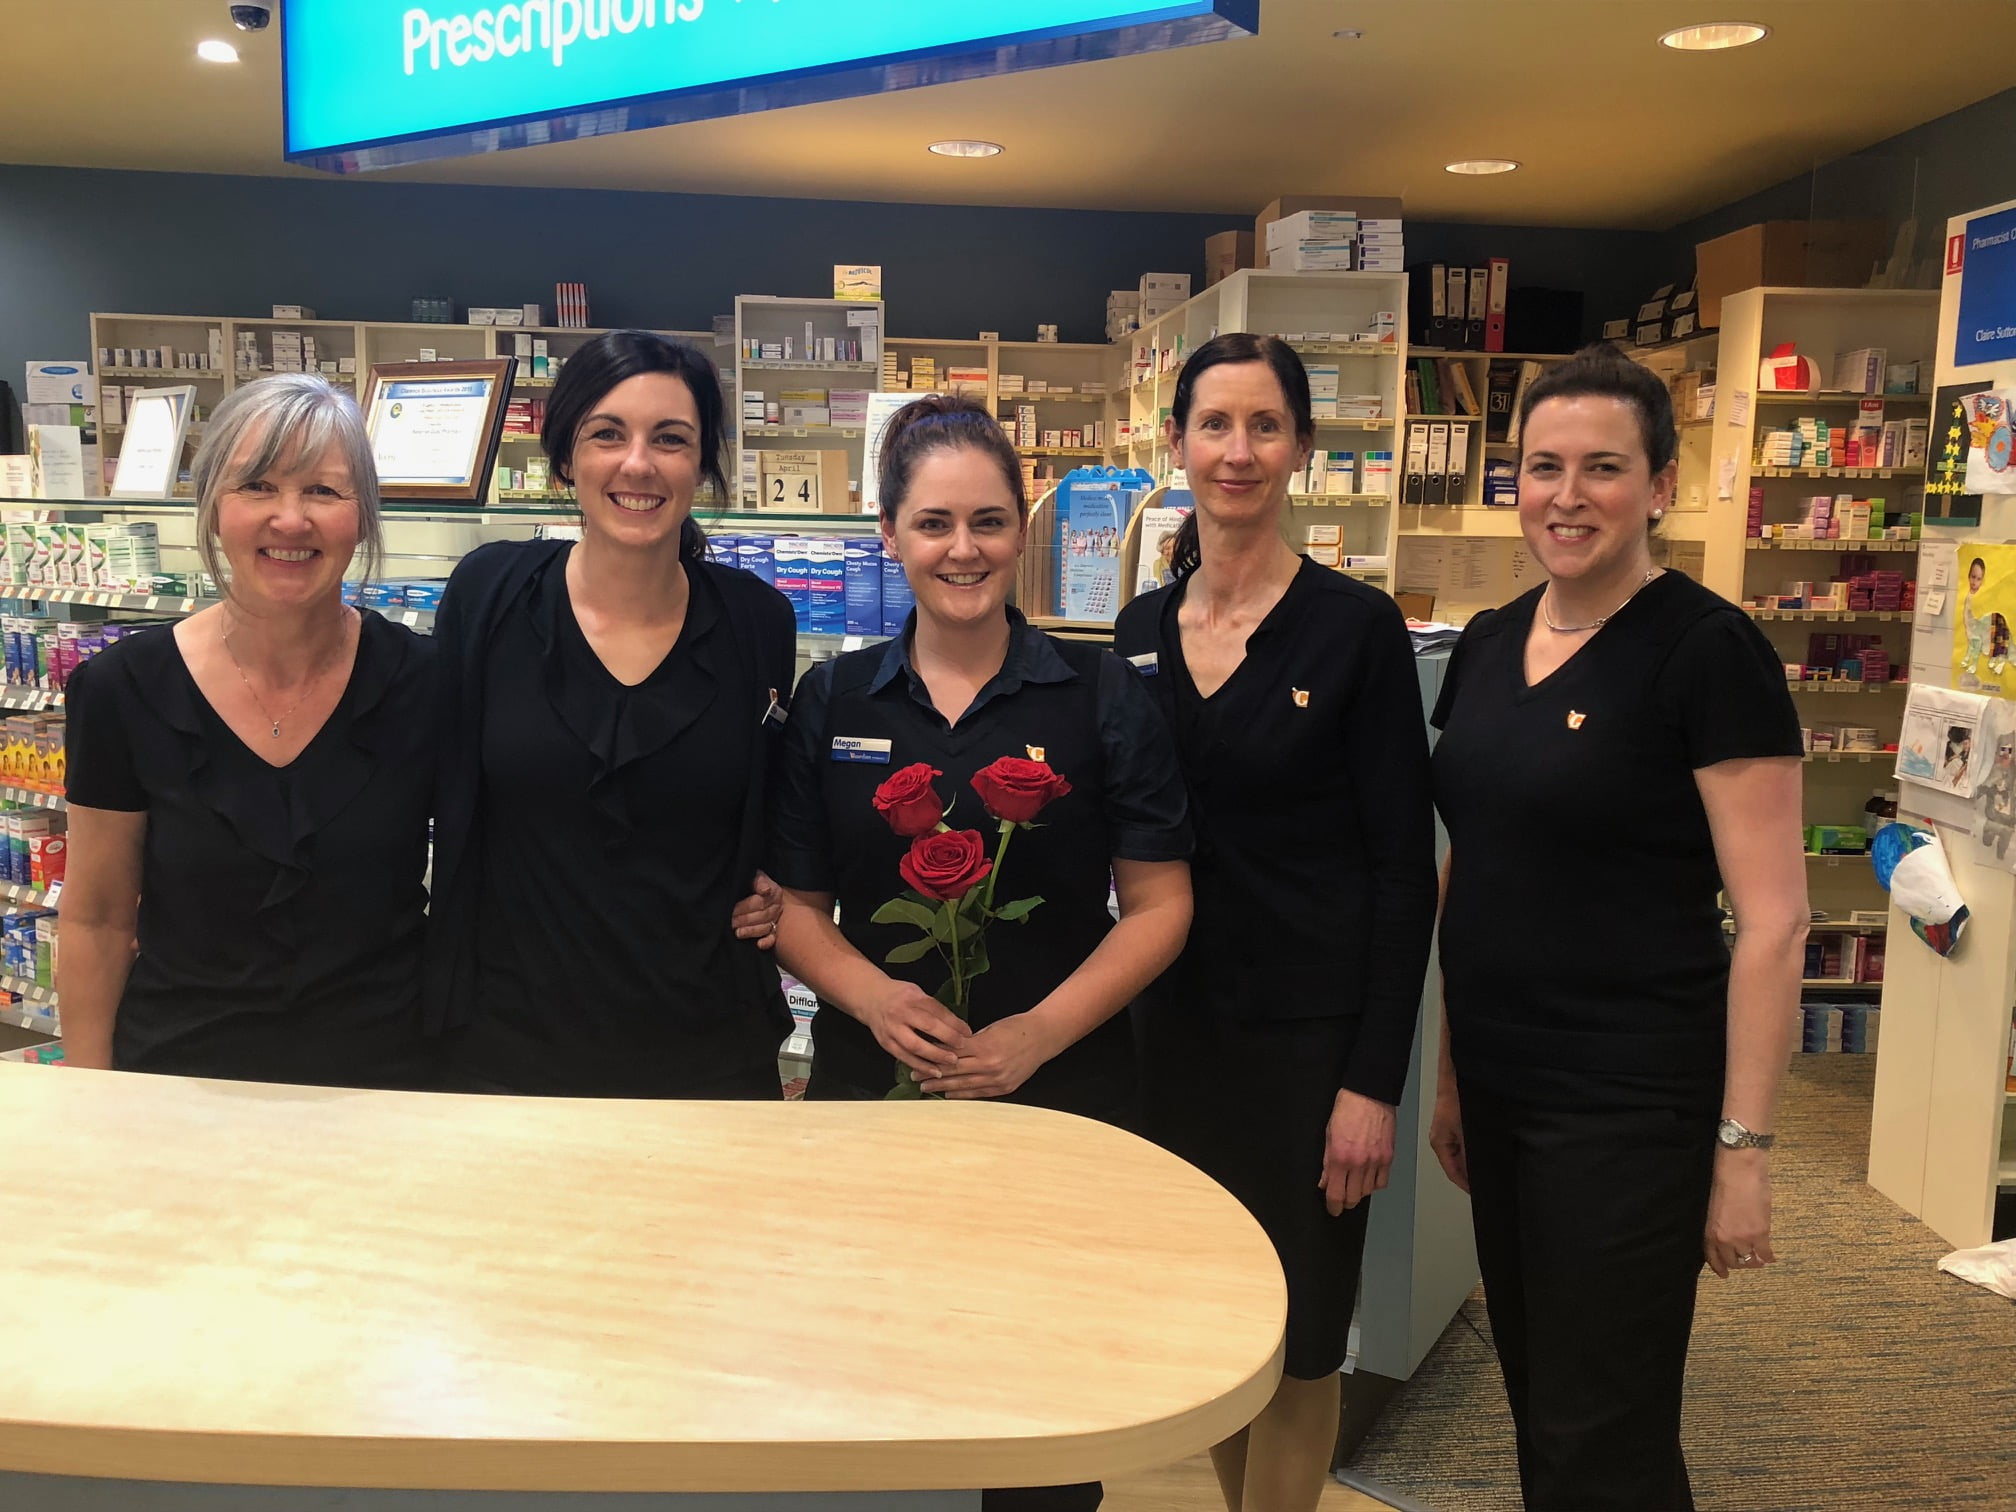 Bellerive Quay Guardian pharmacy donated to 65 Roses. Staff with roses